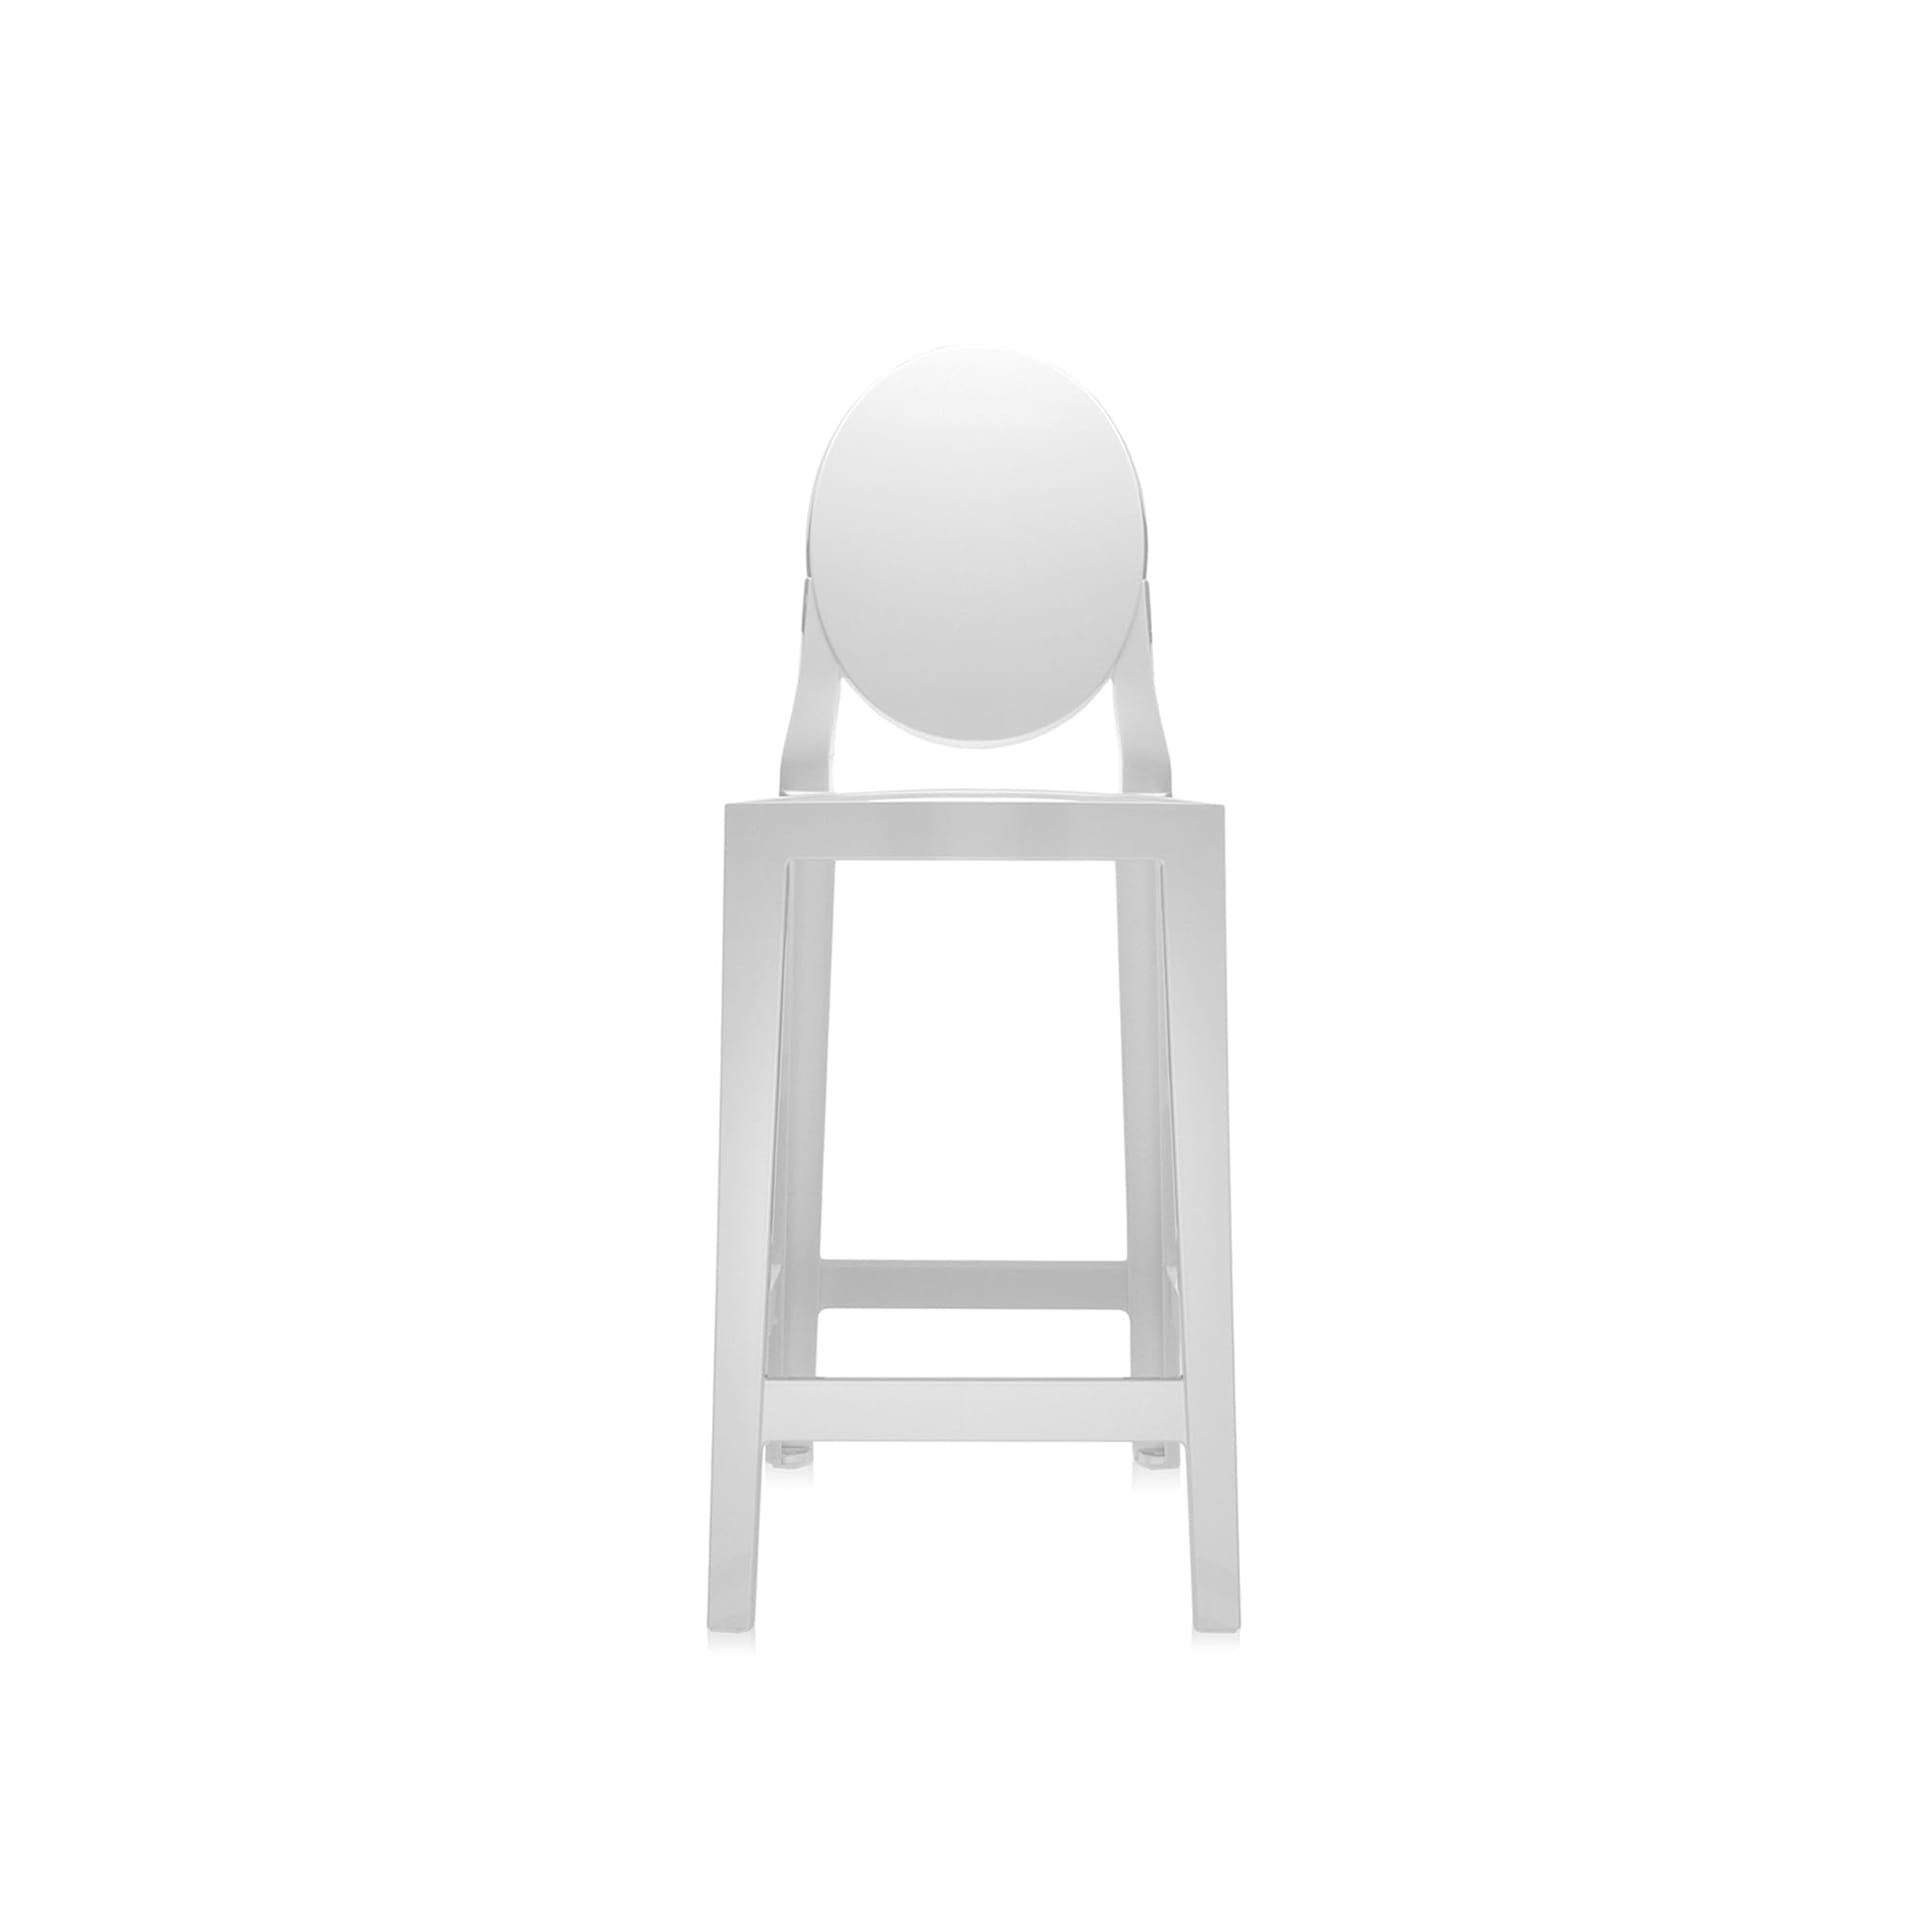 One More Stool Oval Back Rest H.65 cm - Kartell - Philippe Starck - NO GA